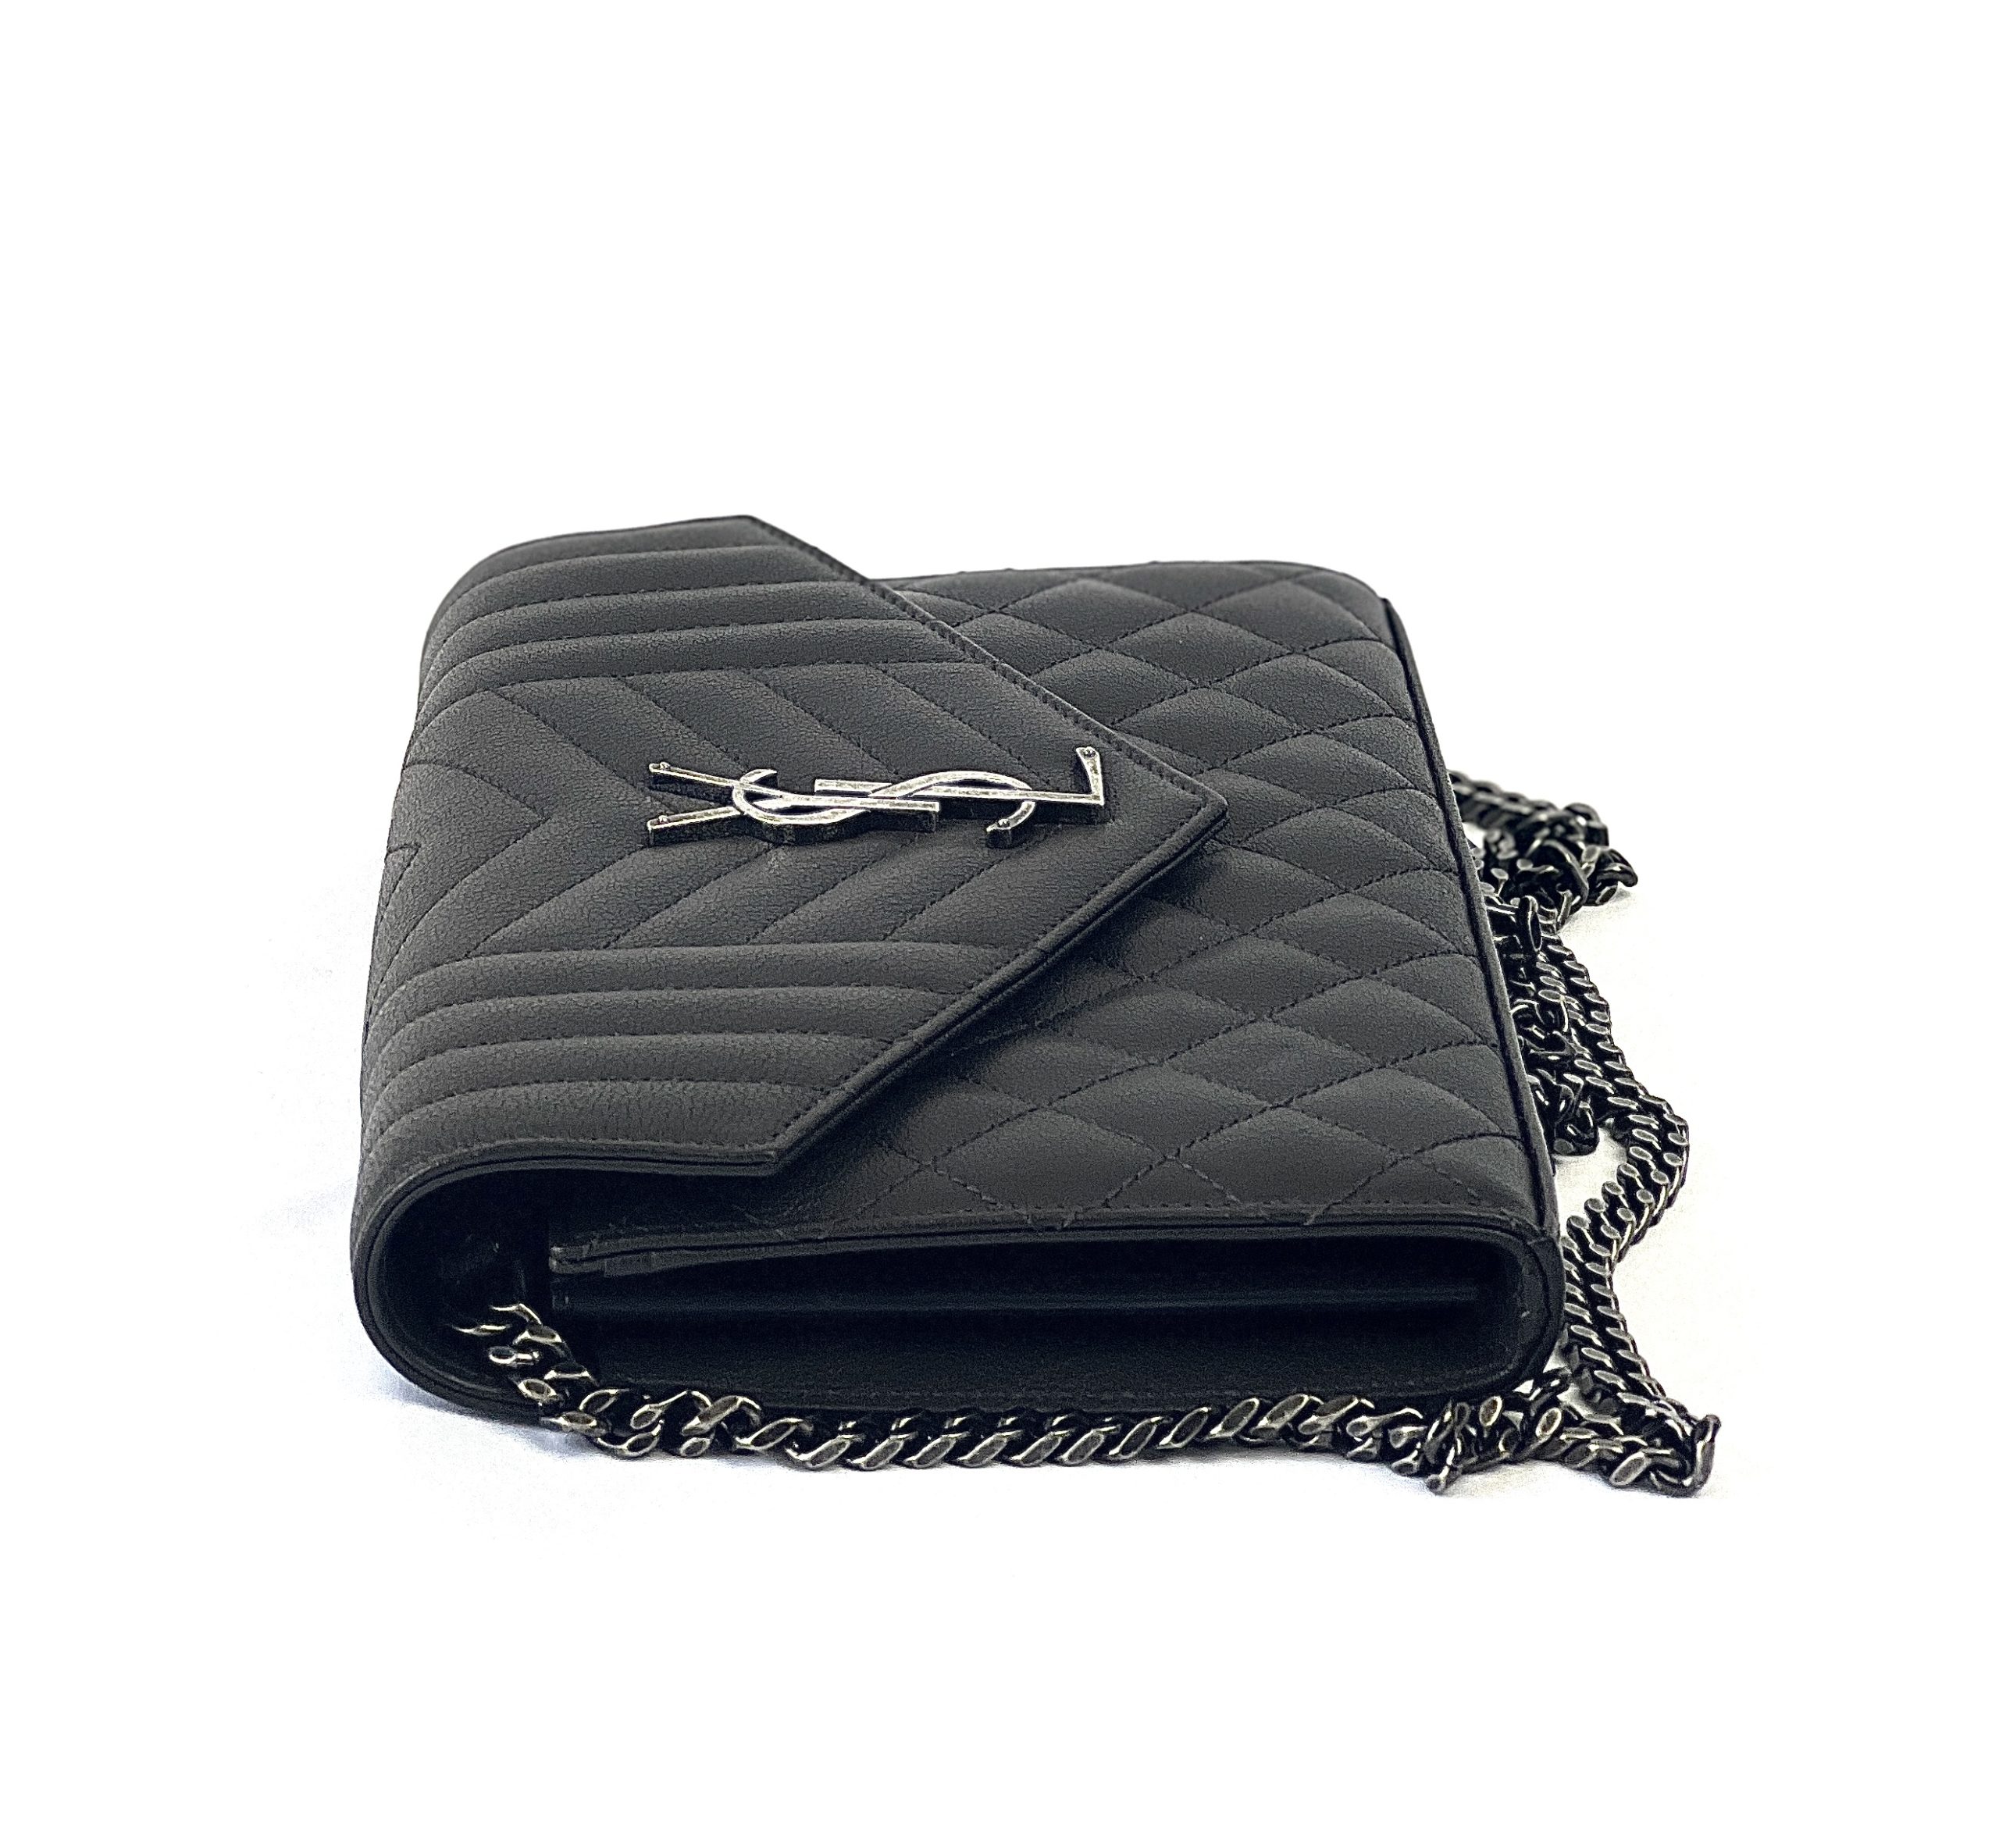 Saint Laurent Women's Envelope Quilted Pebbled Leather Wallet on